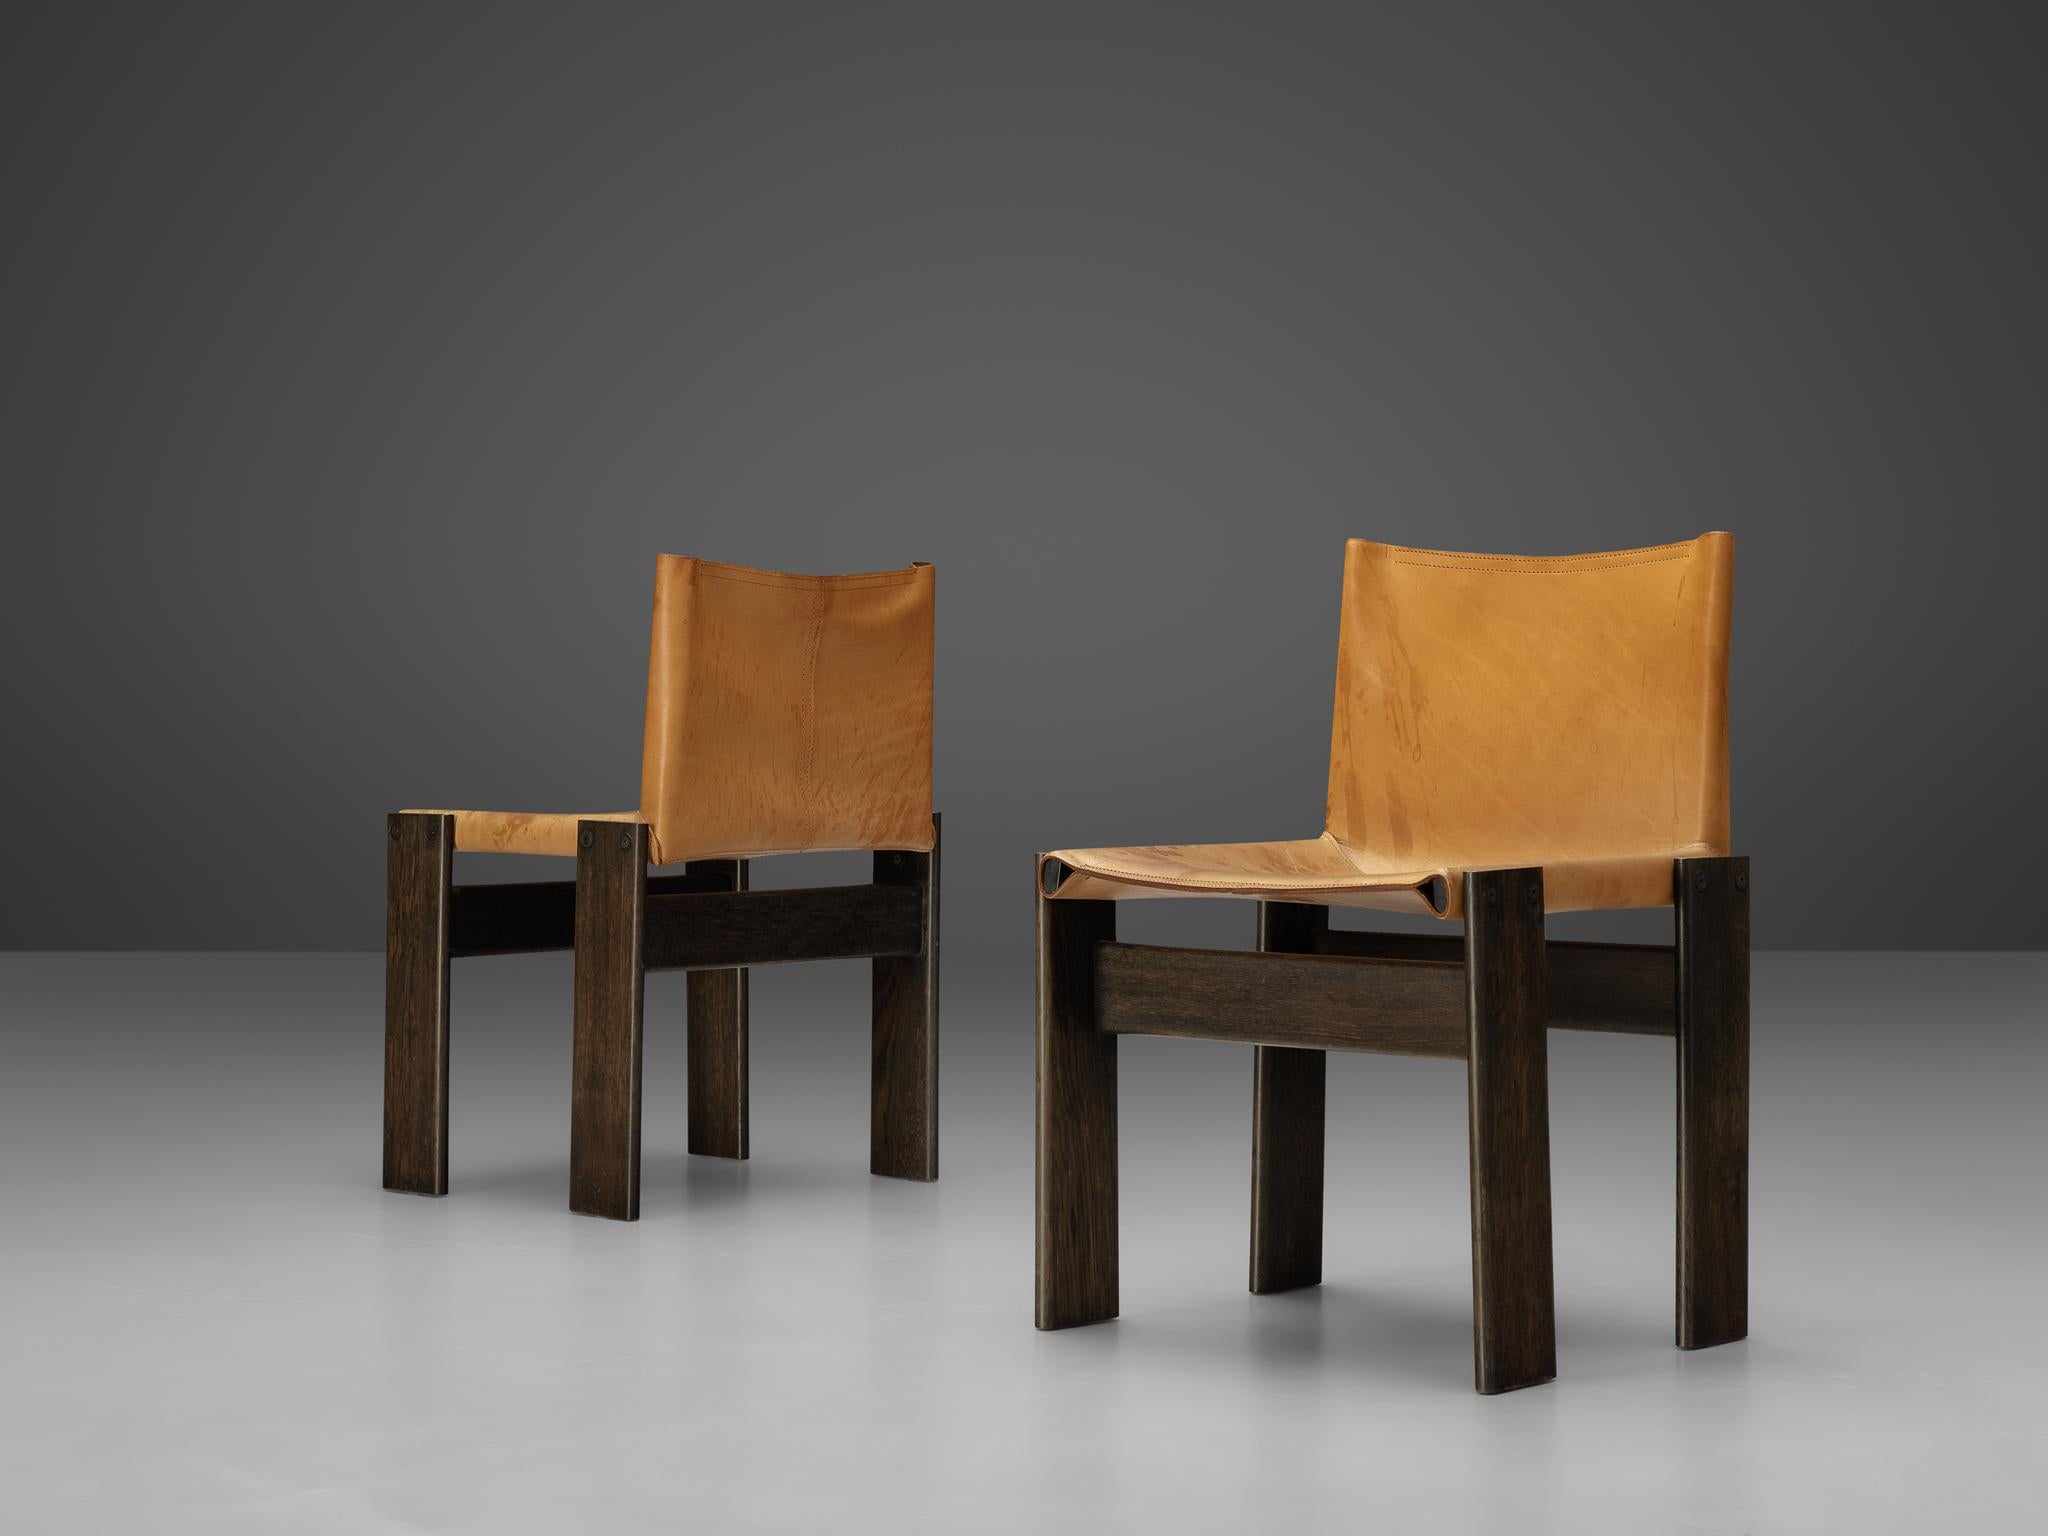 Italian Afra & Tobia Scarpa 'Monk' Chairs in Cognac Leather